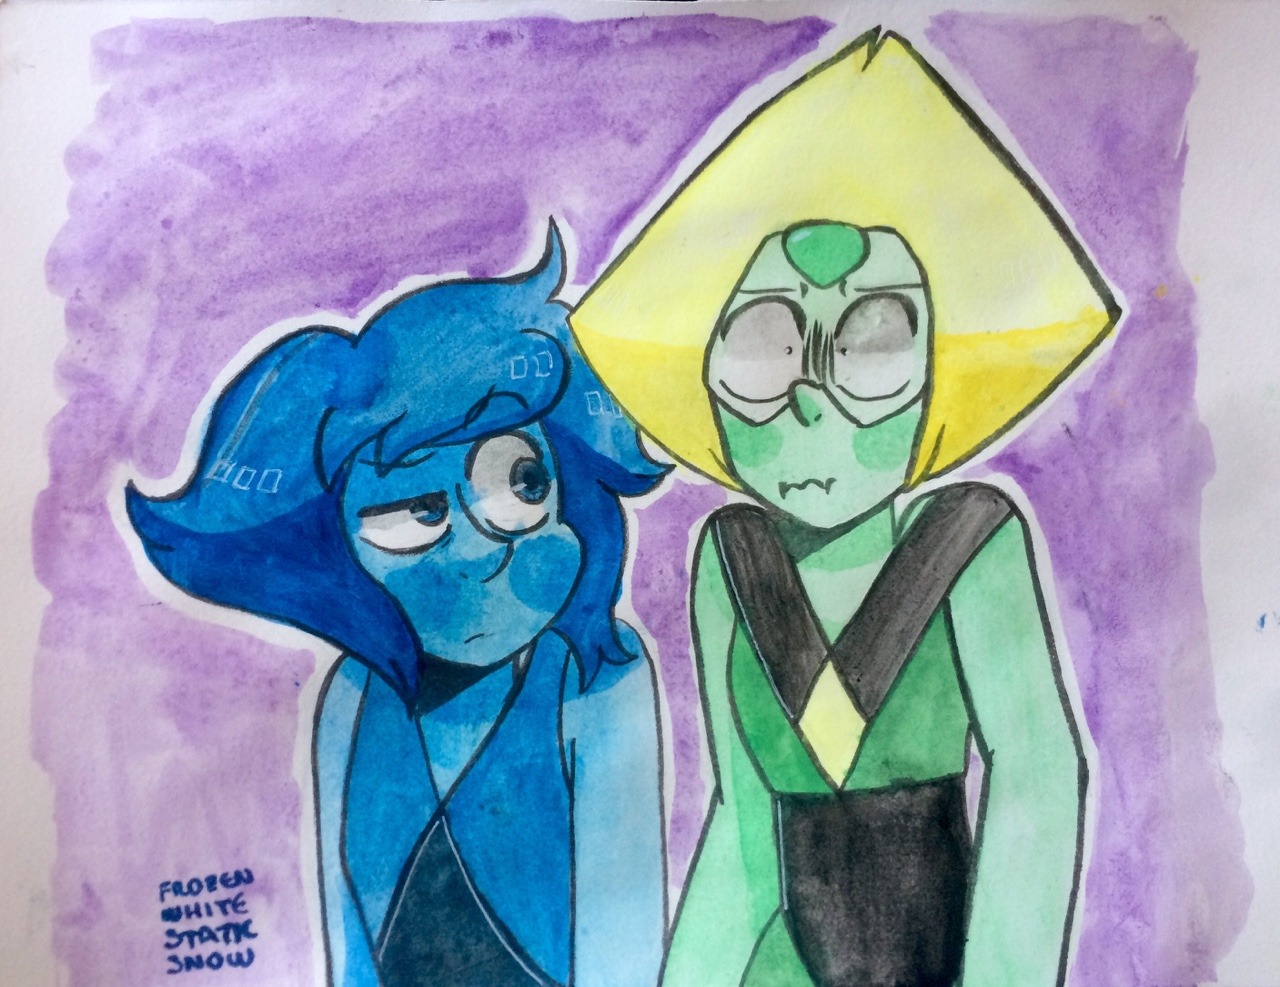 sorry for not posting this week, the tests and works in my school are killing me, but hEY, I DID MY FIRST LAPIDOT DRAWING 💙💚